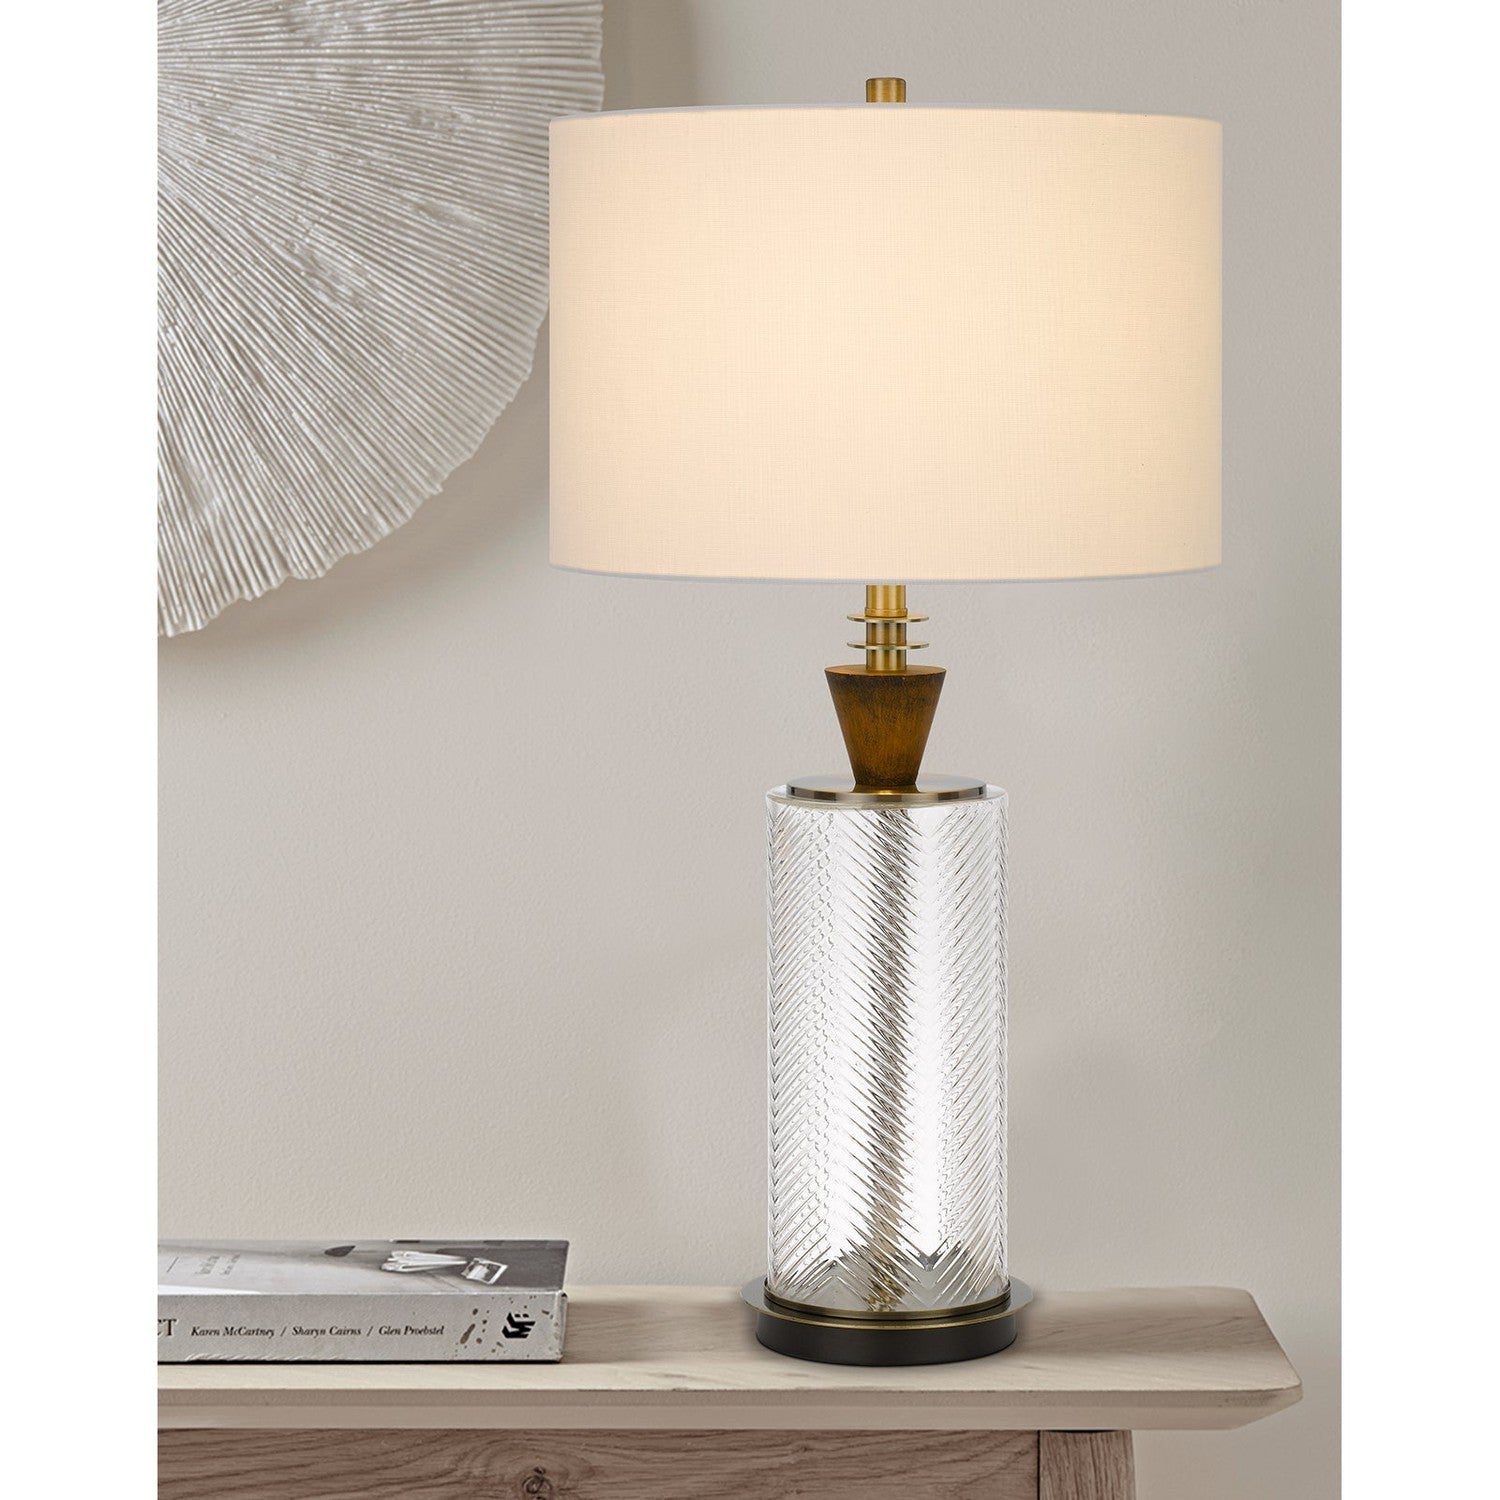 150W 3 way Sherwood glass table lamp with wood font and hardback fabric drum shade-Cal Lighting-CAL-BO-2987TB-Table Lamps-2-France and Son